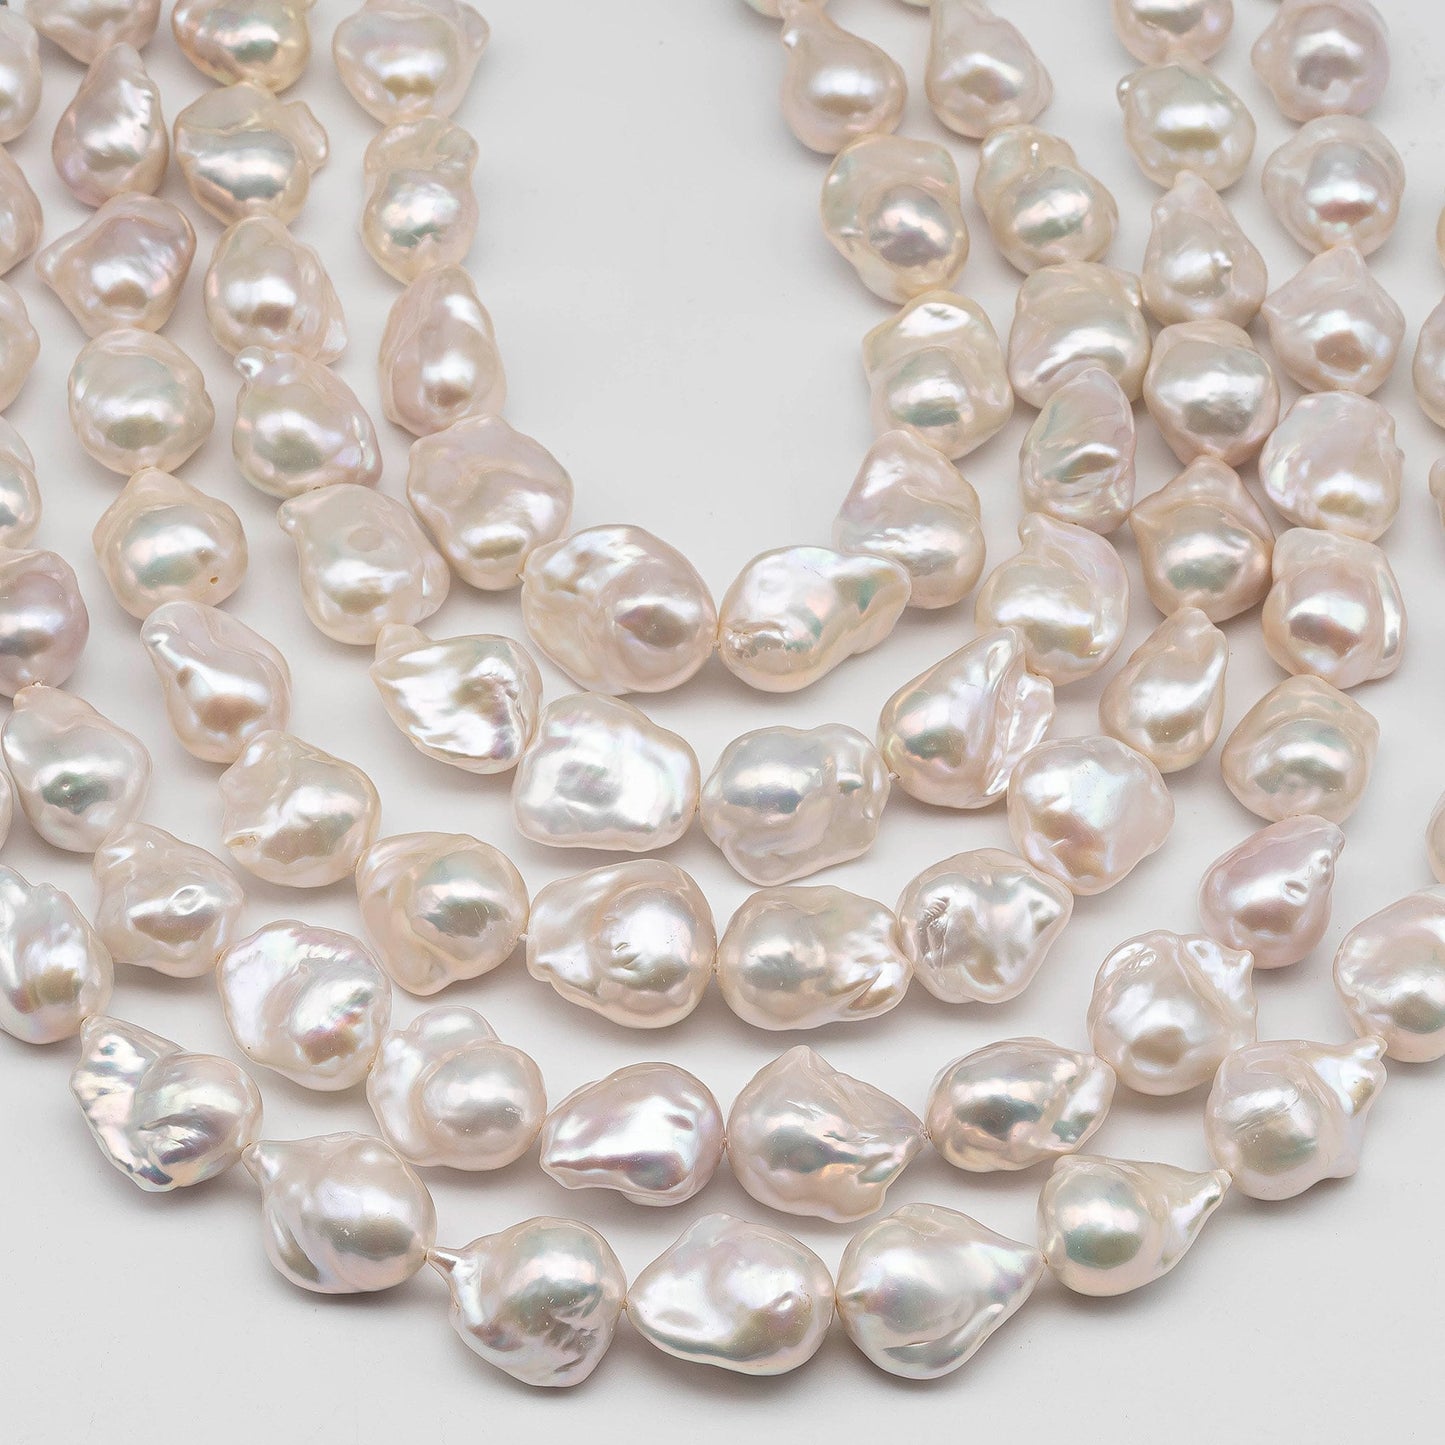 AAA 16-18mm Freshwater Baroque Pearl, Top Quality with Gorgeous Luster and Smooth Surface in Full Strand for Jewelry Making, SKU # 1436BA